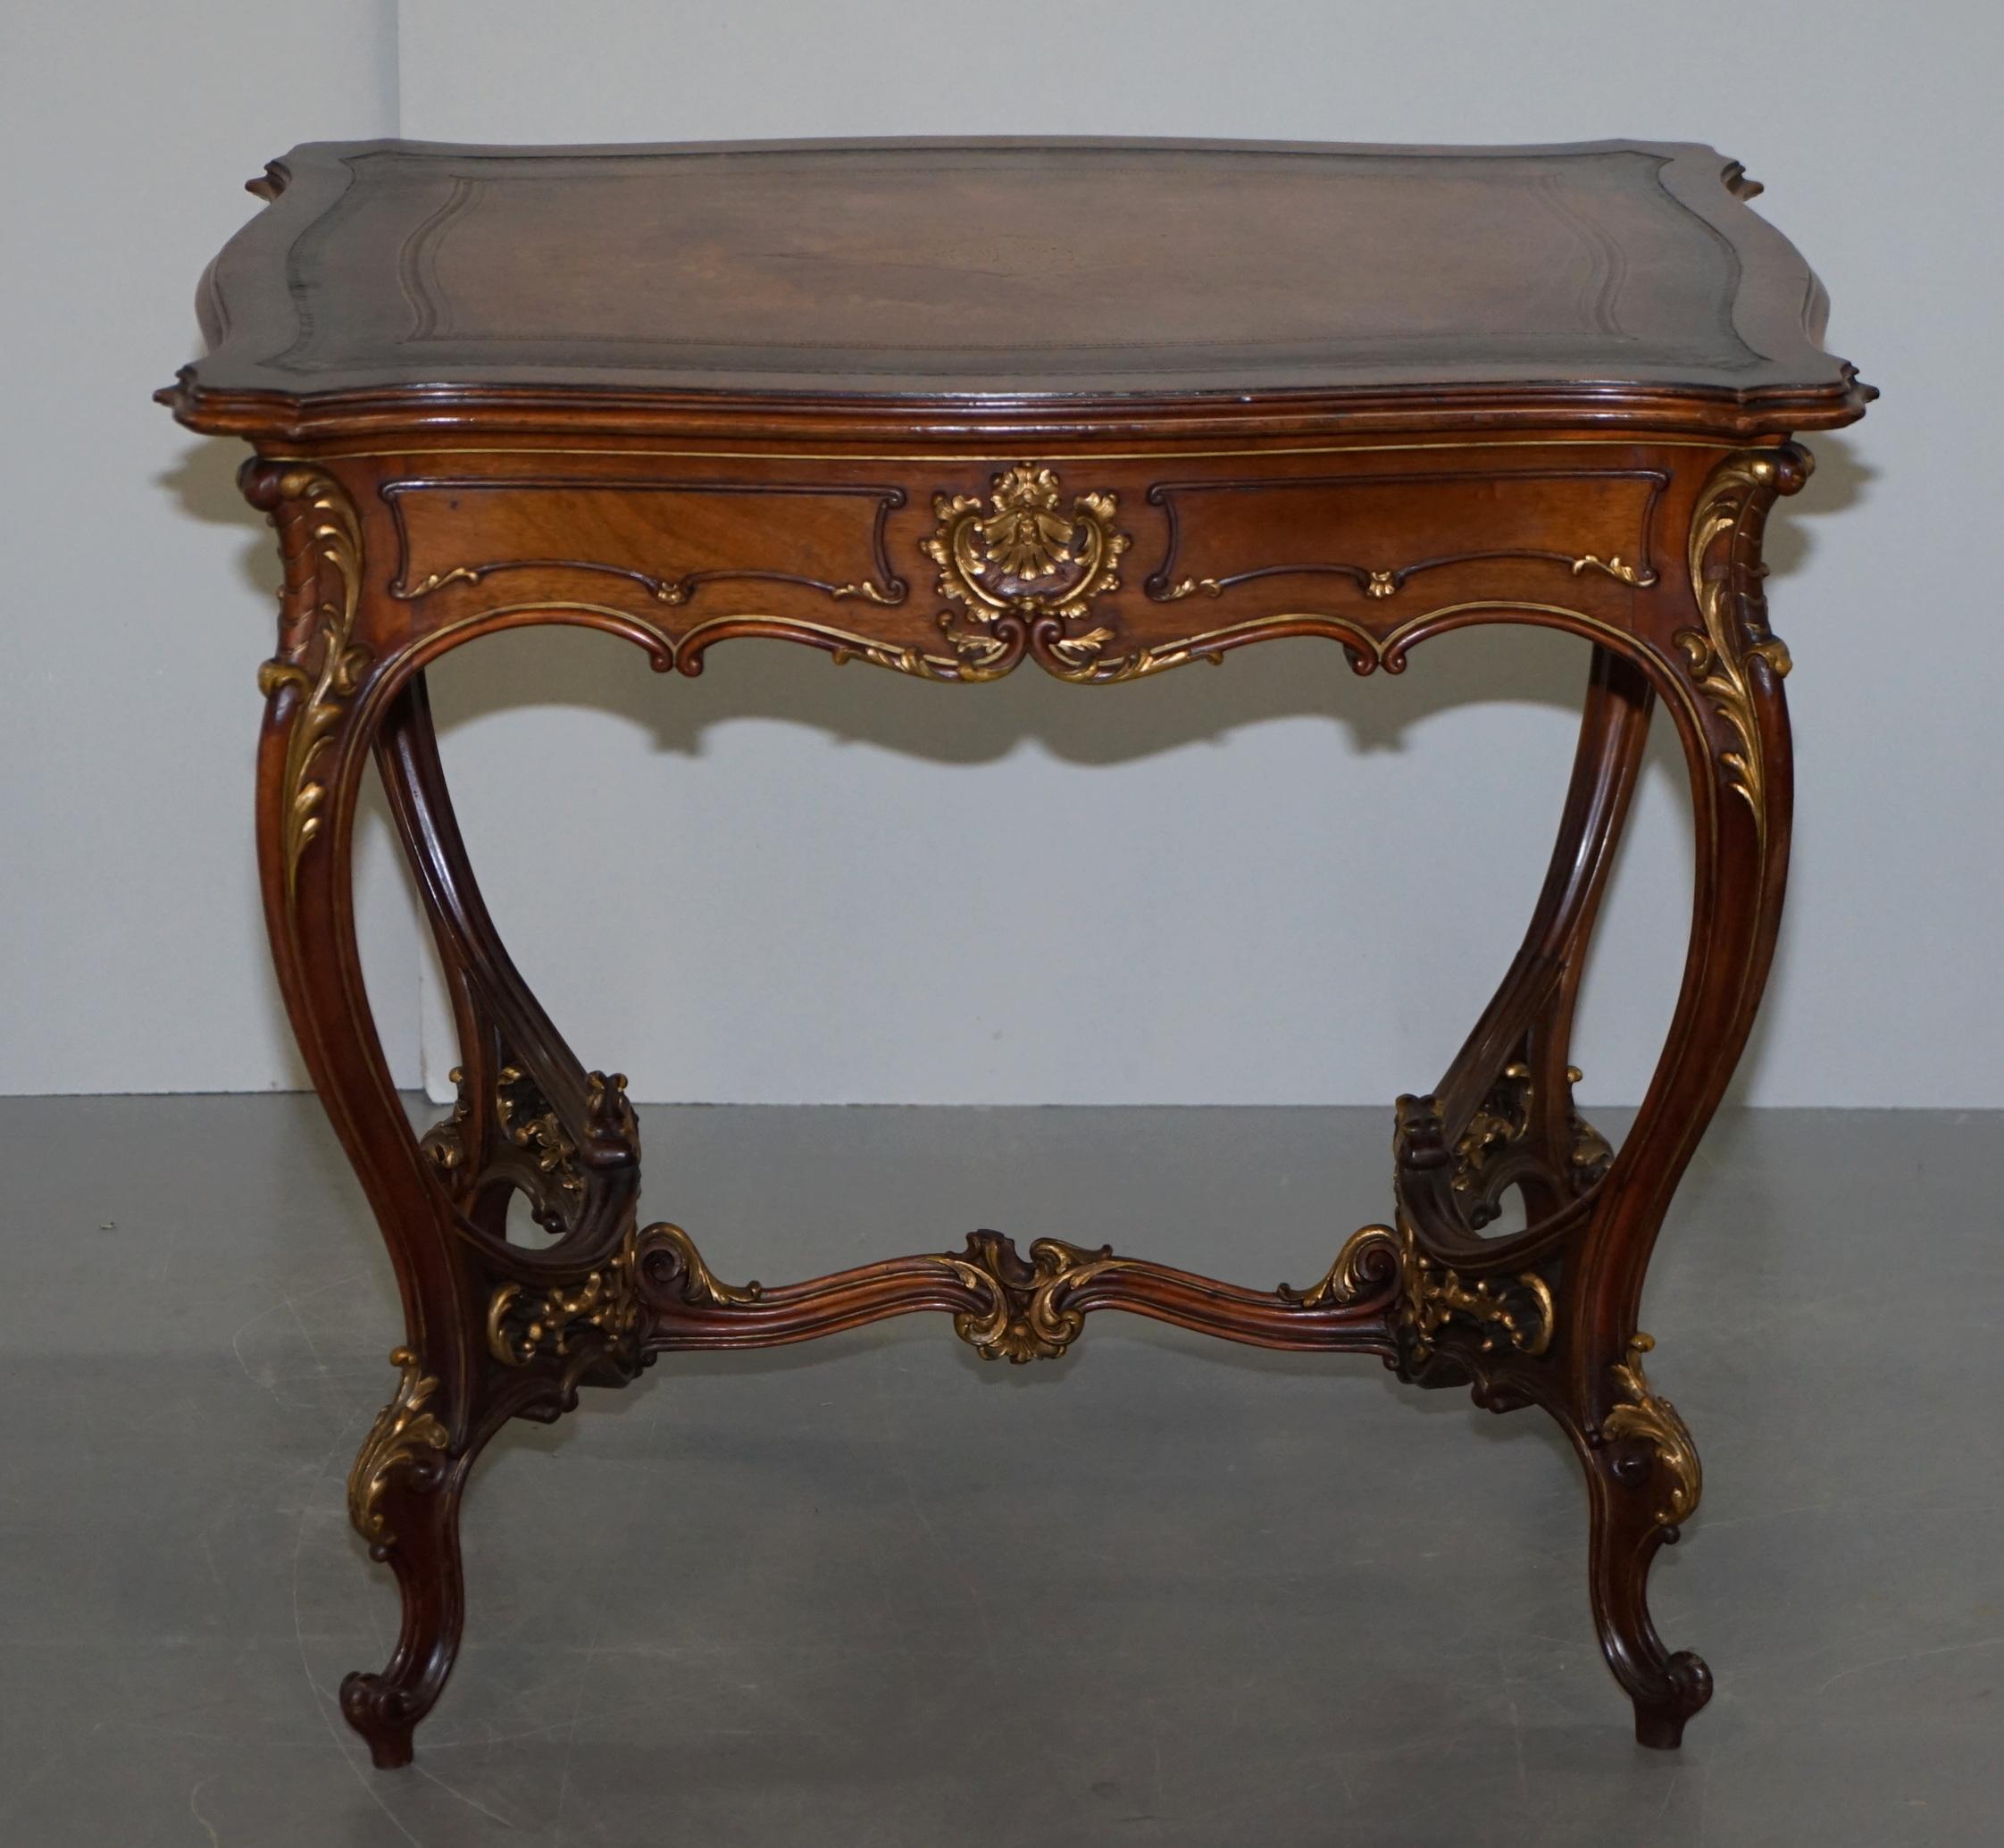 We are delighted to offer for sale this lovely antique French circa 1900 late Victorian pine writing table, desk or occasional centre table with brown leather top and giltwood frame

A very decorative and versatile piece, it looks to have been